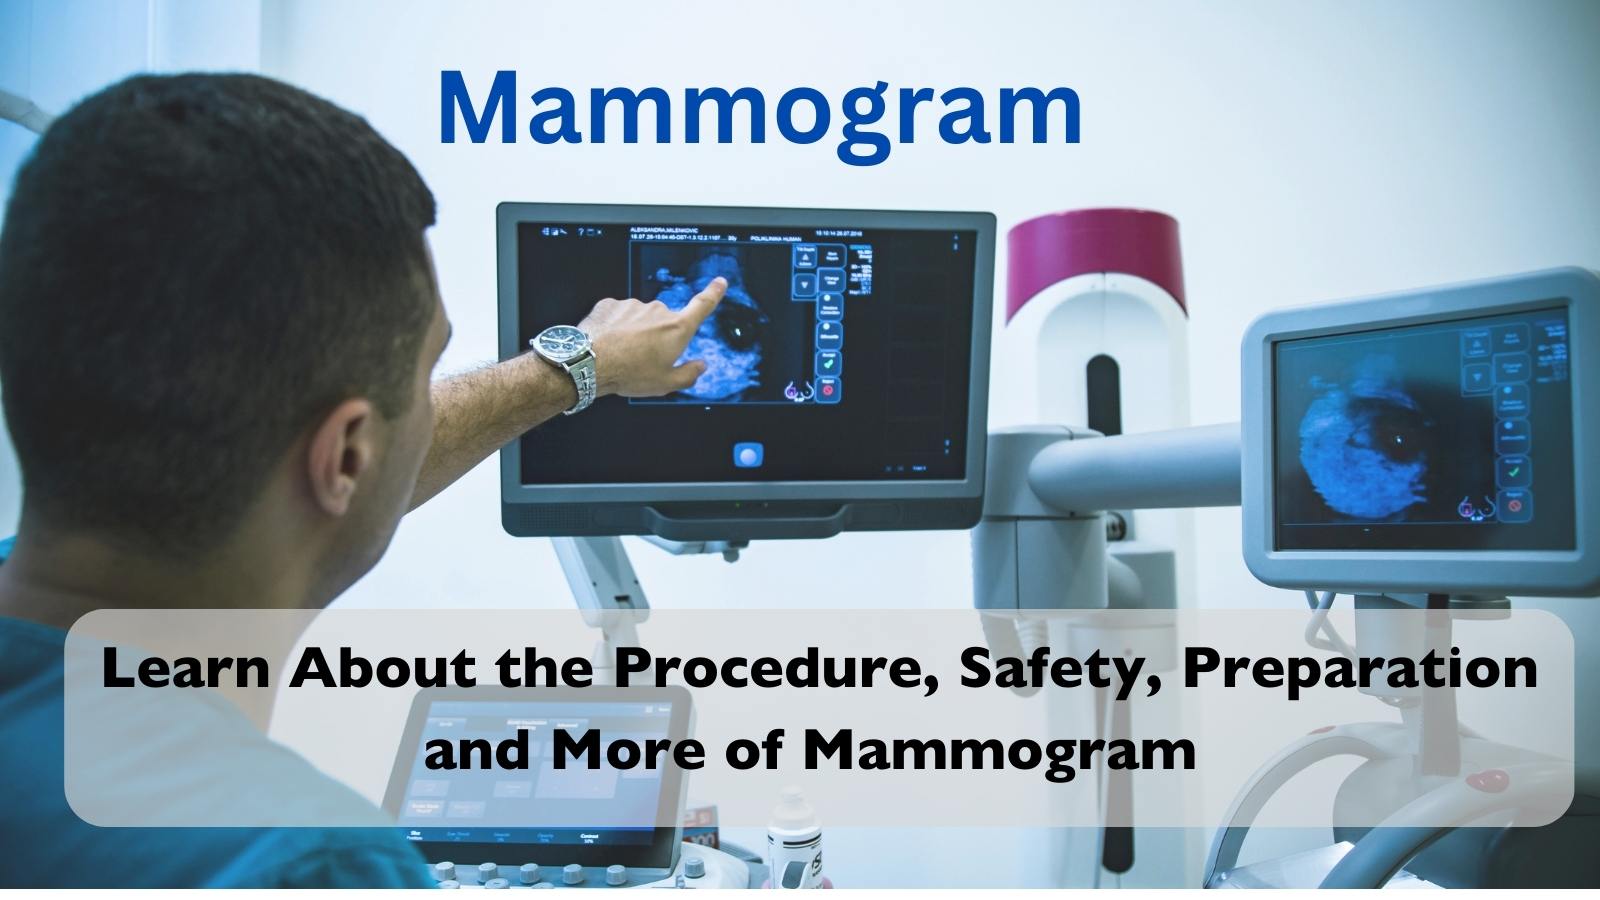 Mammogram Procedure, Safety, Preparation and More.